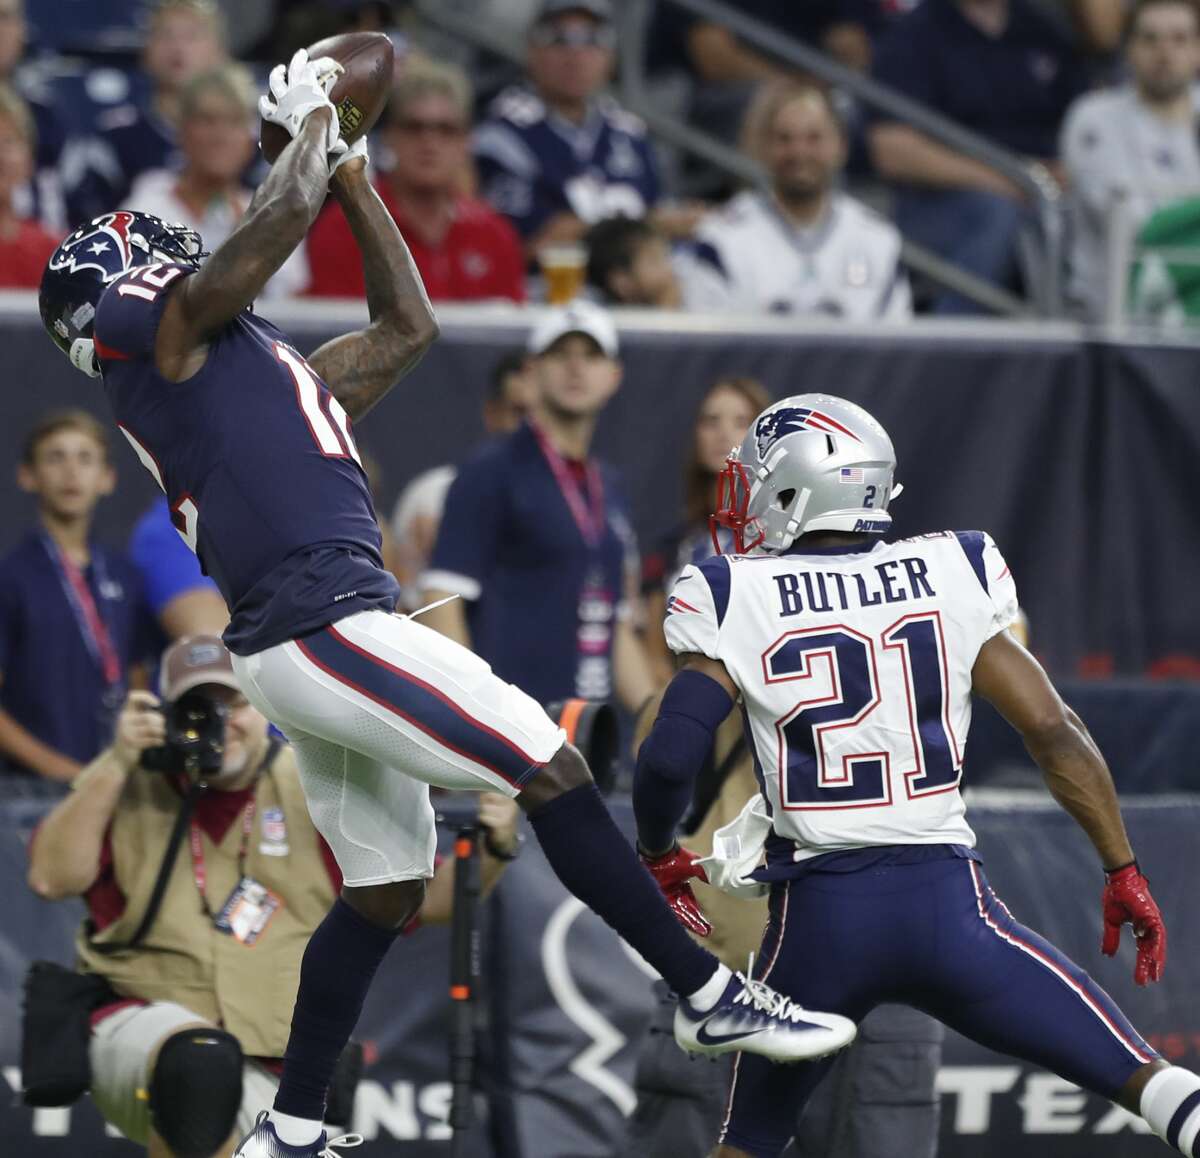 Houston Texans wide receiver Bruce Ellington (12) leaps over New England Patriots cornerback Malcolm Butler (21) for a 37-yard reception during the first quarter of an NFL preseason game at NRG Stadium, Saturday, Aug. 19, 2017, in Houston. ( Karen Warren / Houston Chronicle )